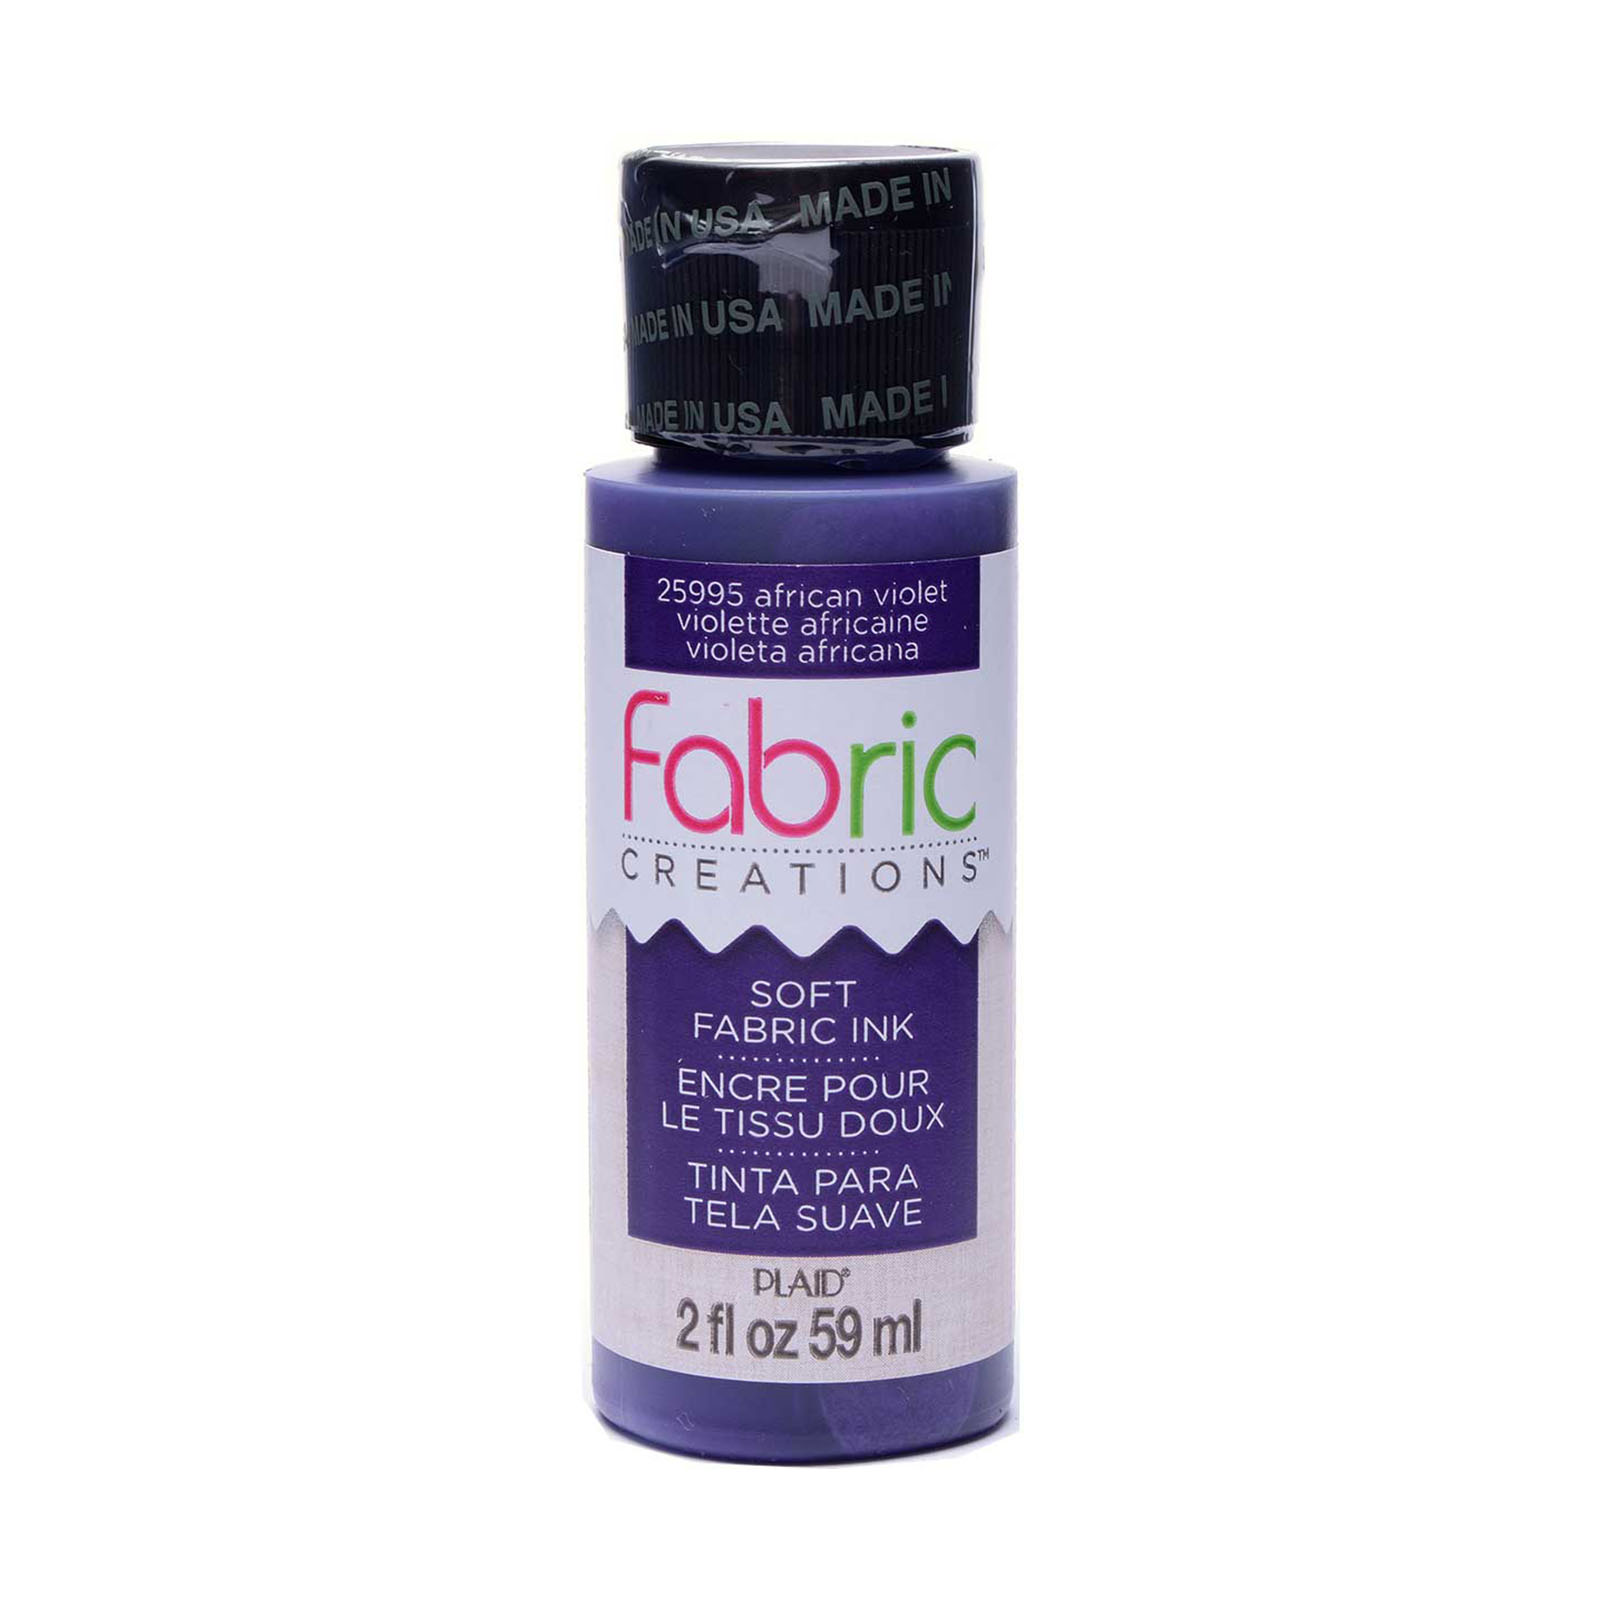 Fabric Creations • Soft fabric inkt 59ml Wild violet